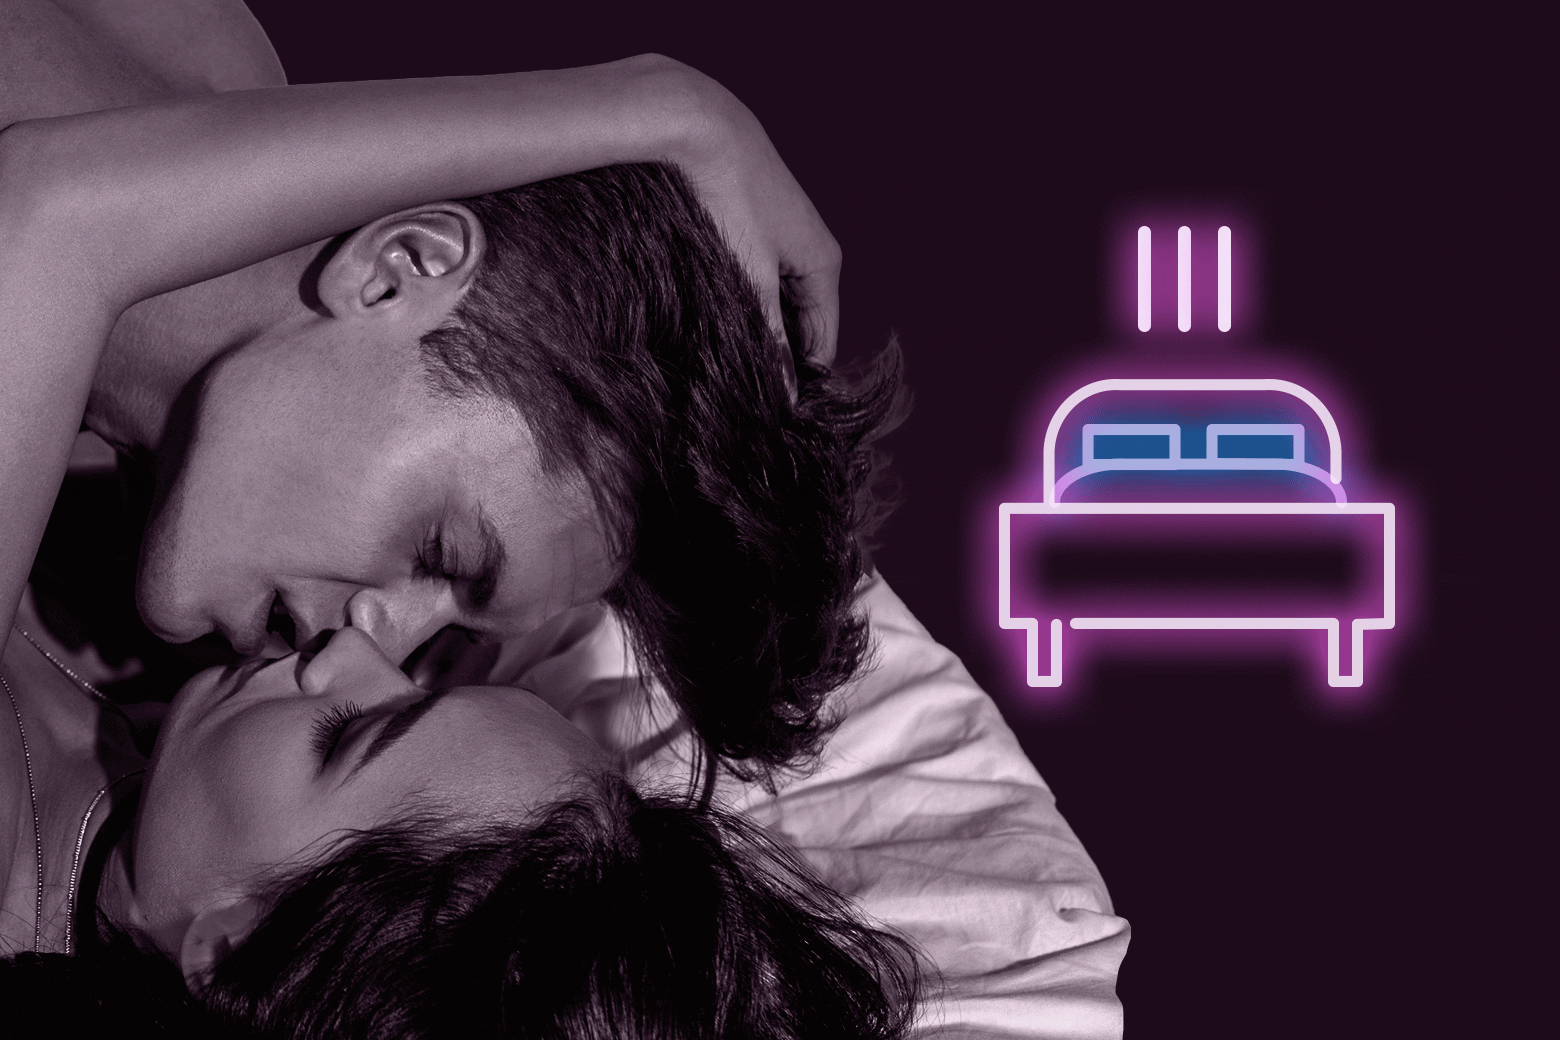 My Wife Indulged My Hottest Fantasy—Briefly. Now I Can’t Stop Thinking About It.